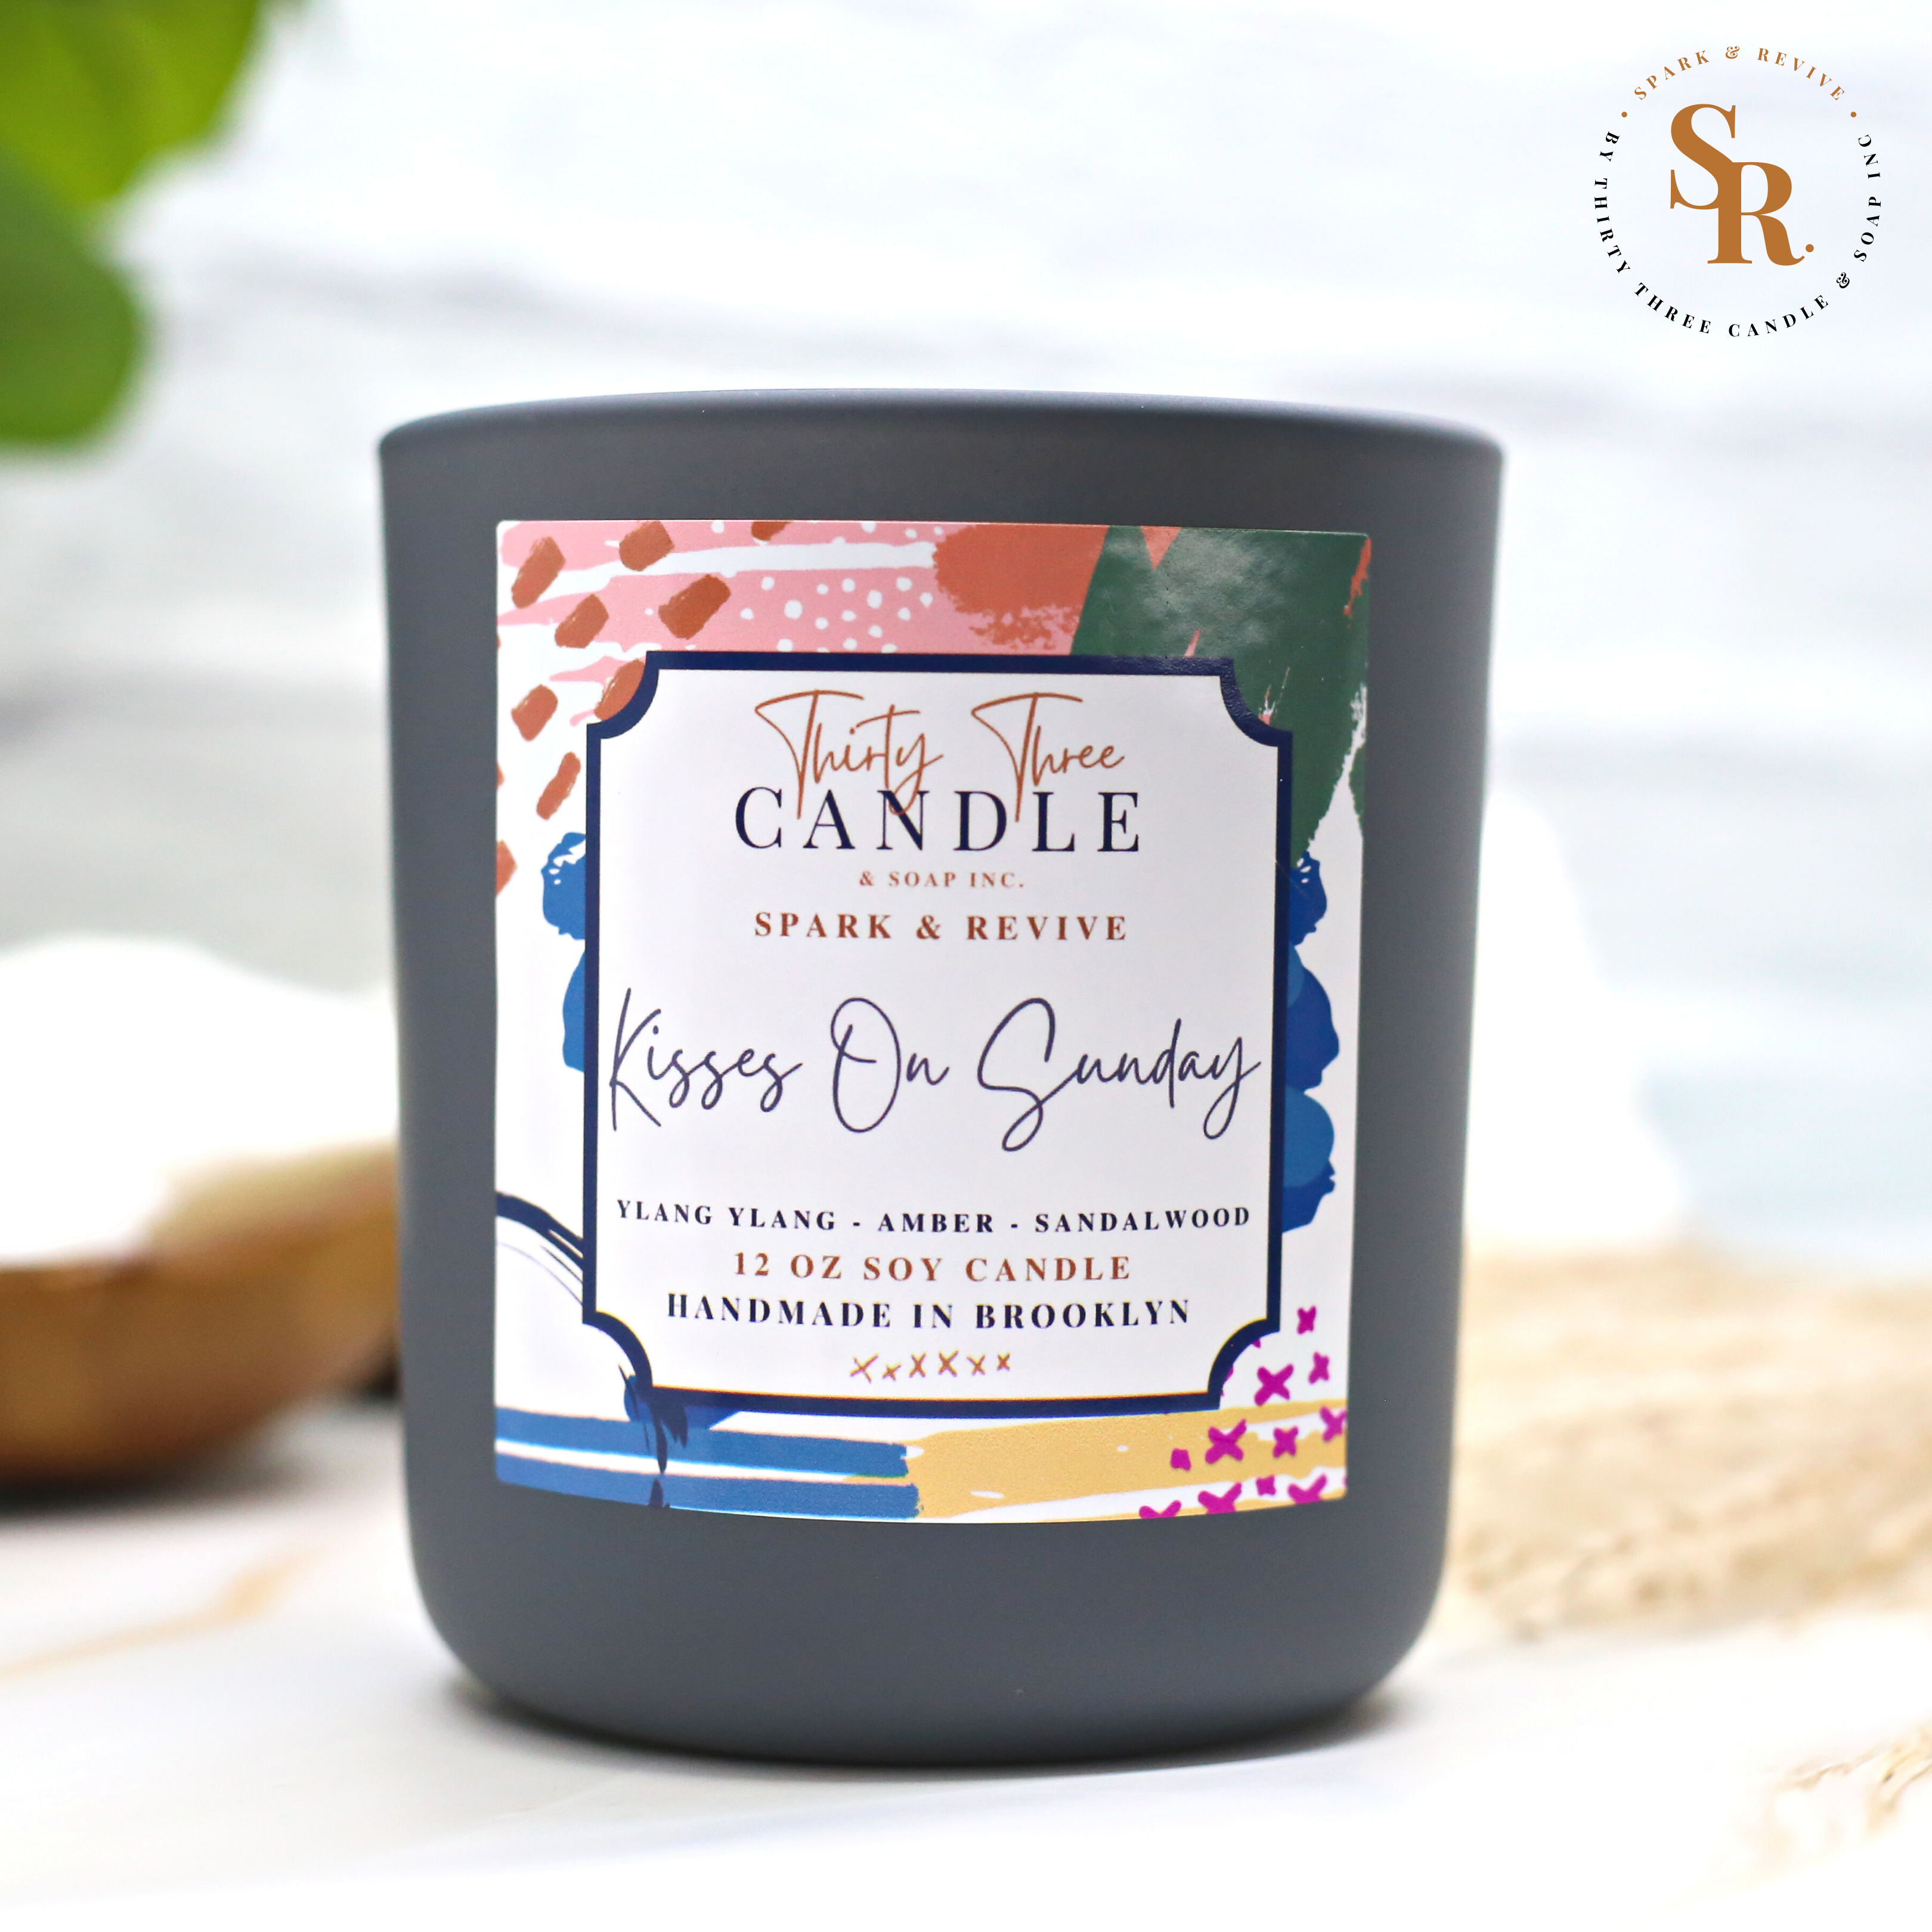 Kisses On Sunday Scented Soy Candle